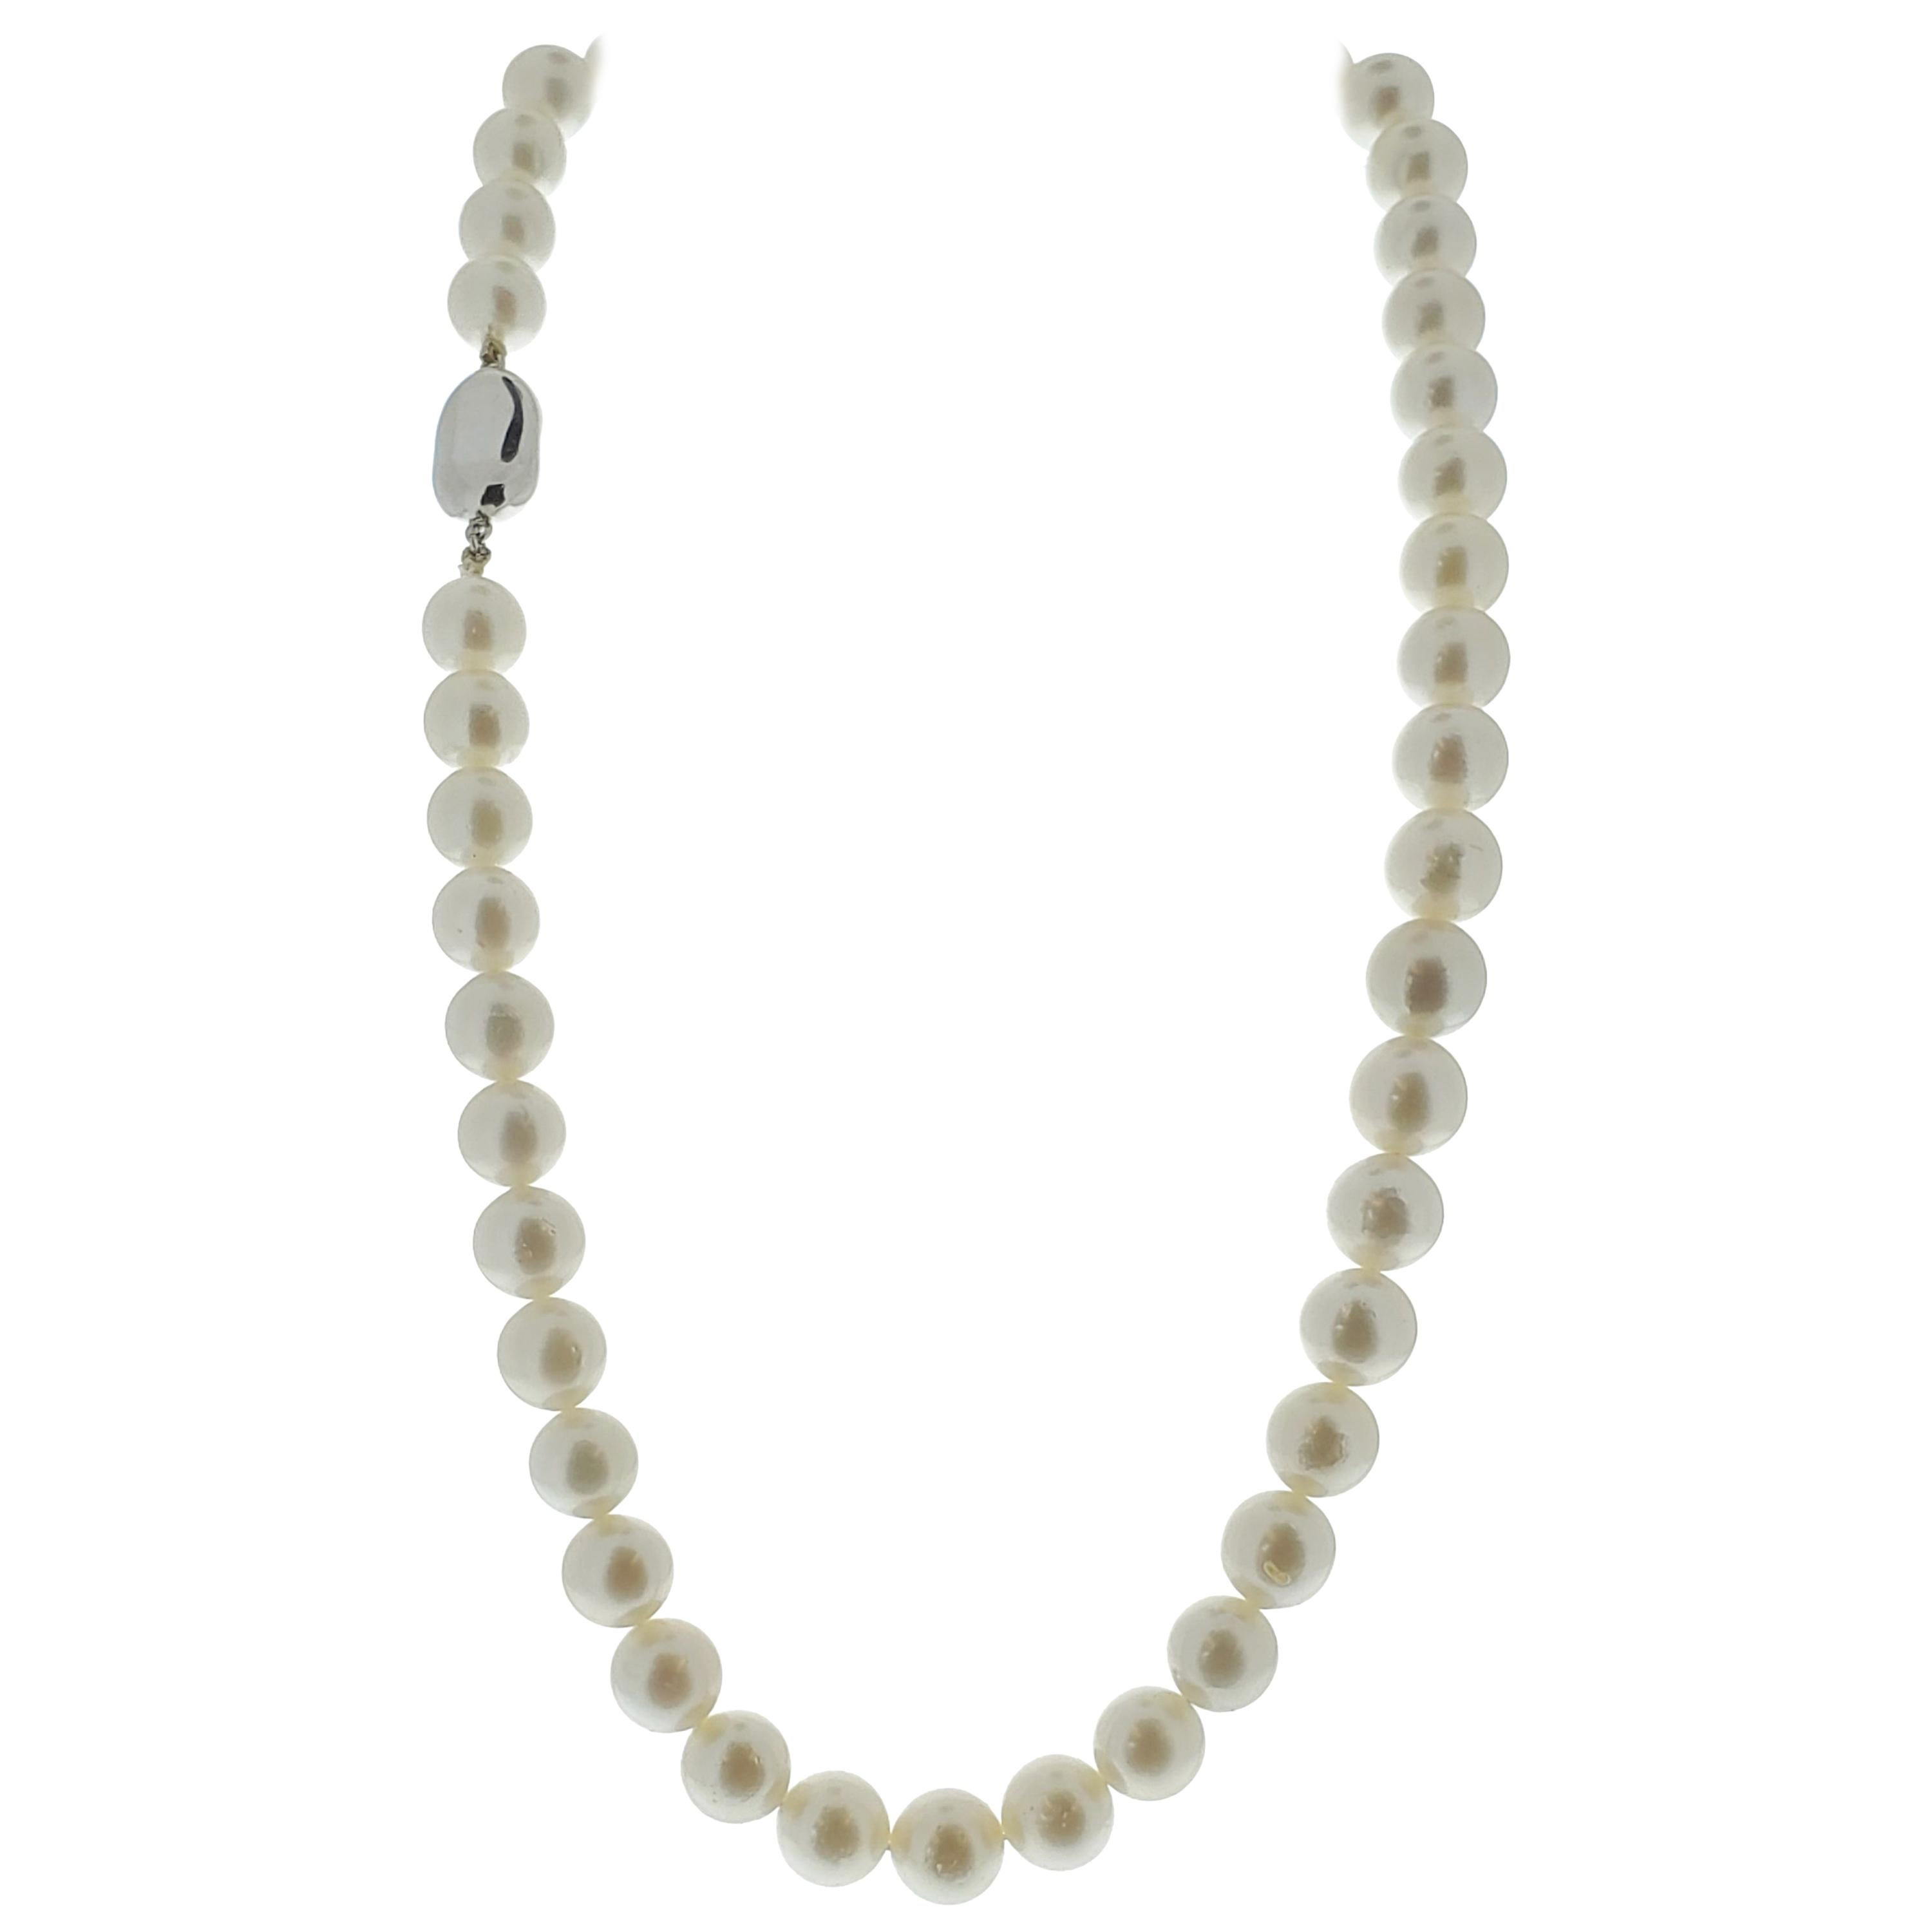 Sea Pearl and Diamond Necklace with Silver Clasp